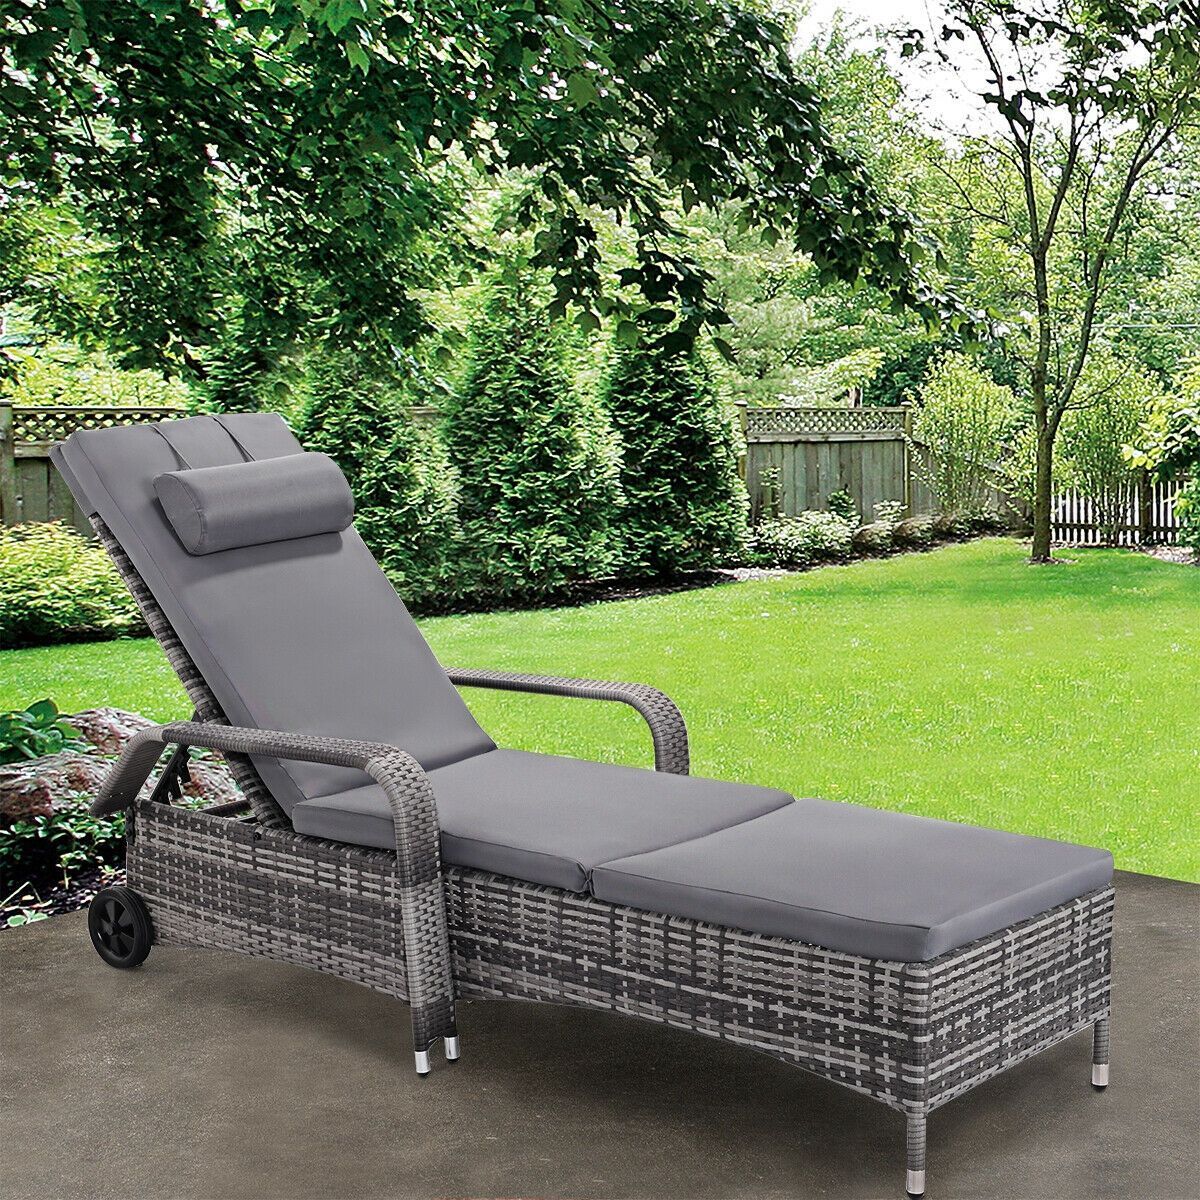 Outdoor Rattan Adjustable Cushioned Lounge Chair In 2020 | Used Outdoor Pertaining To Adjustable Outdoor Lounger Chairs (View 15 of 15)